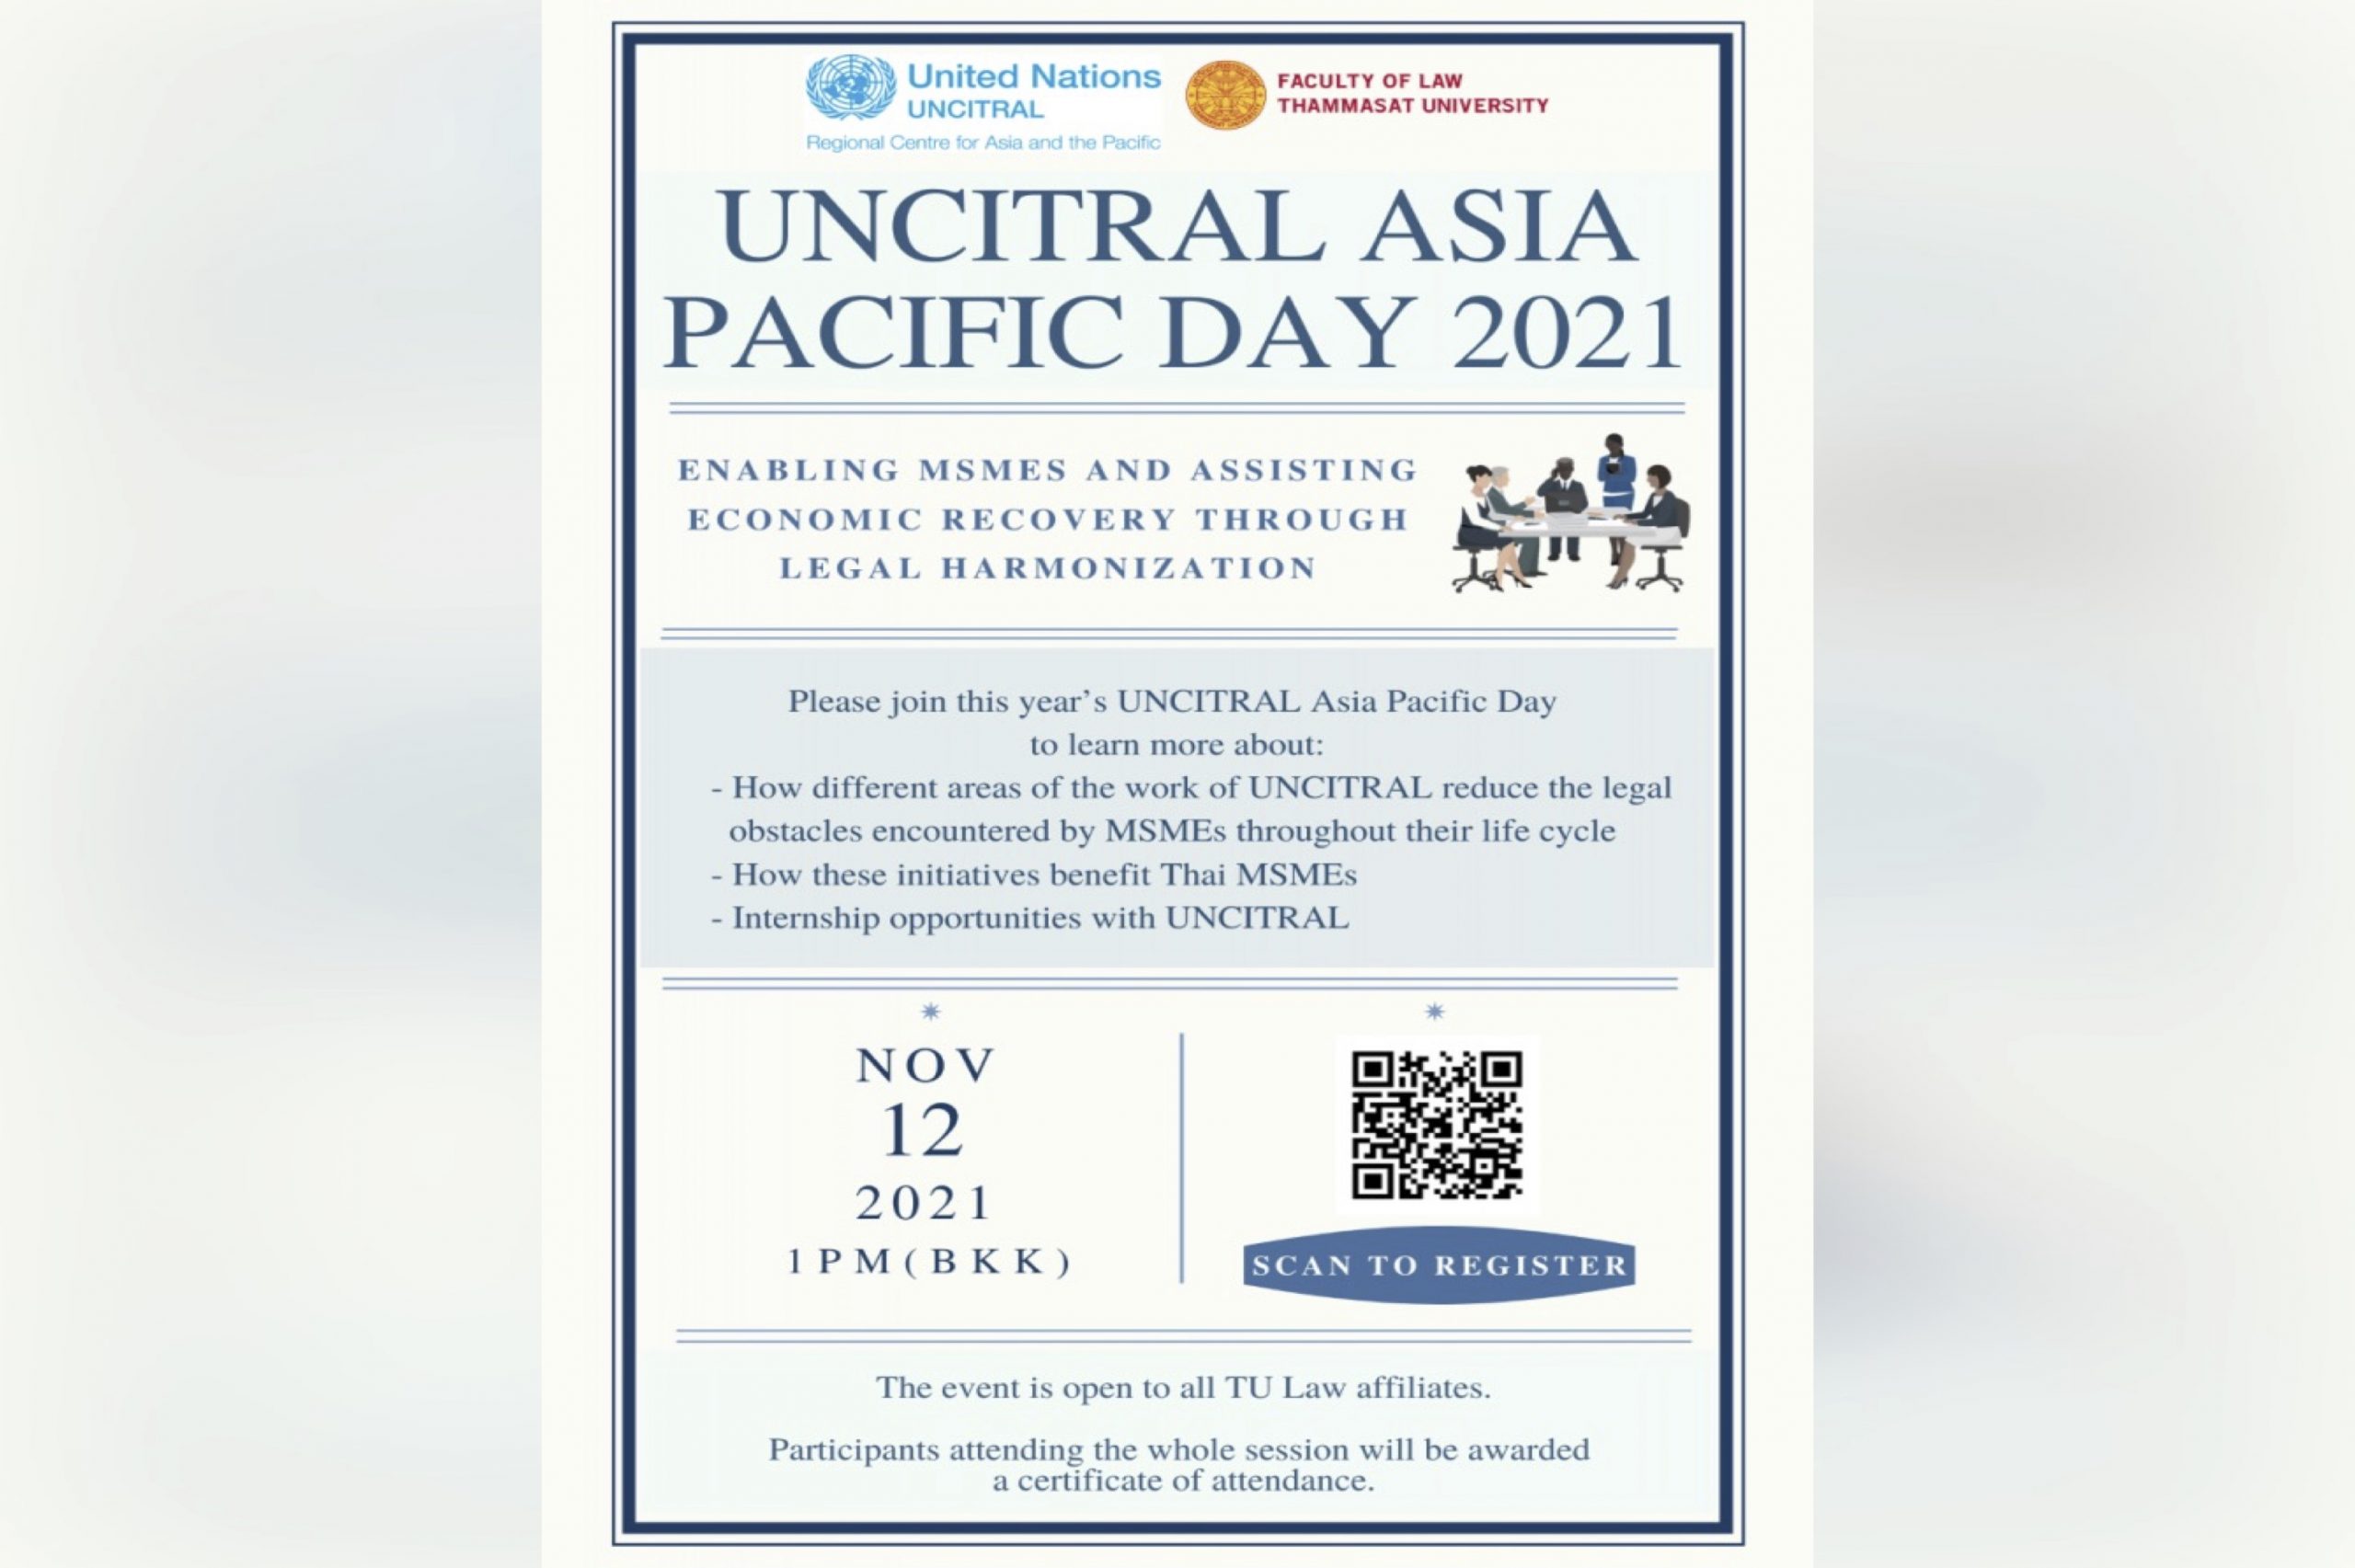 UNCITRAL Asia Pacific Day 2021